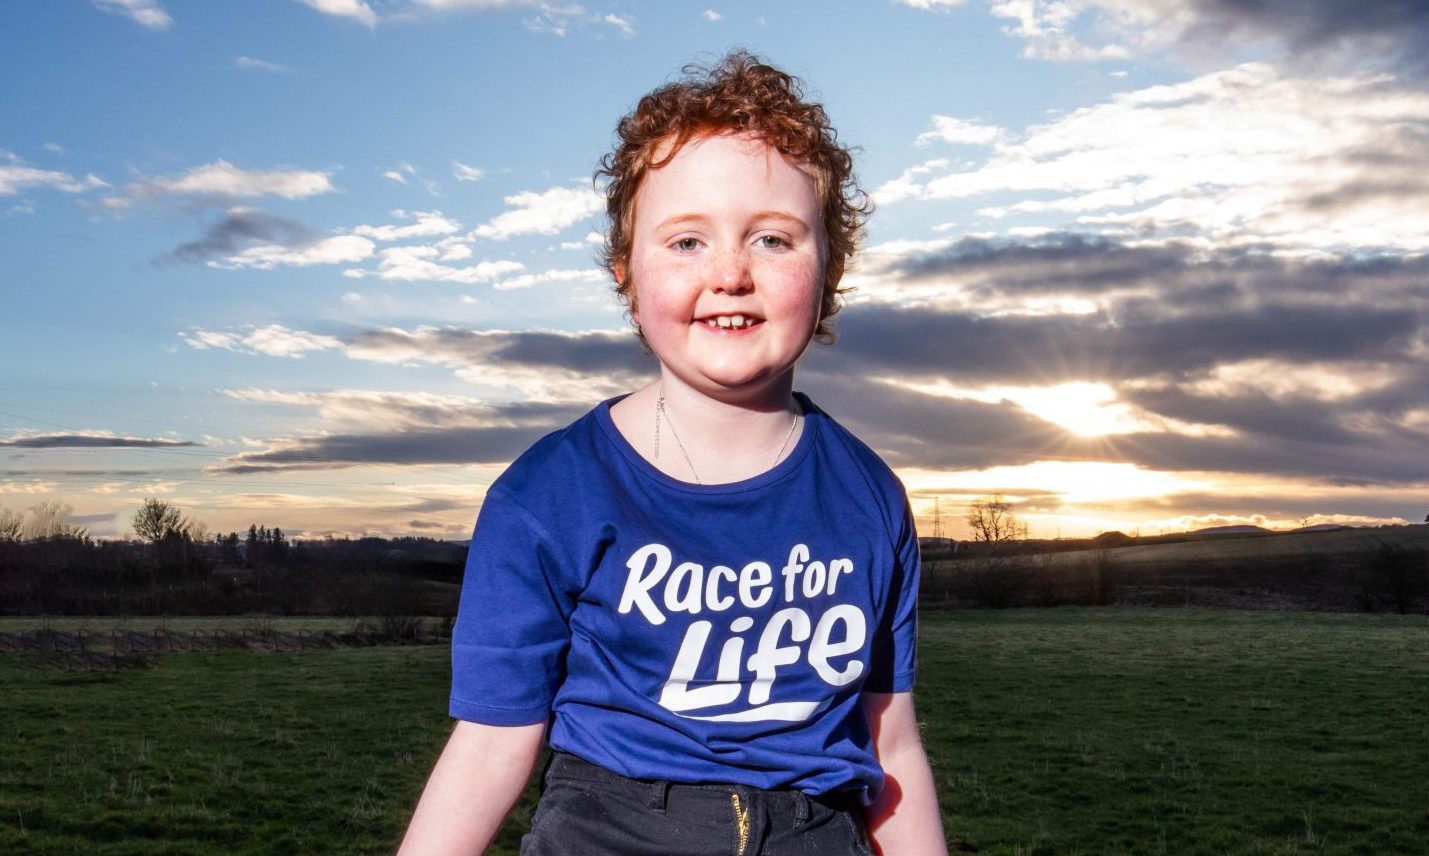 Aurora Farren siting on a fence wearning a blue Race for Life T-shirt.